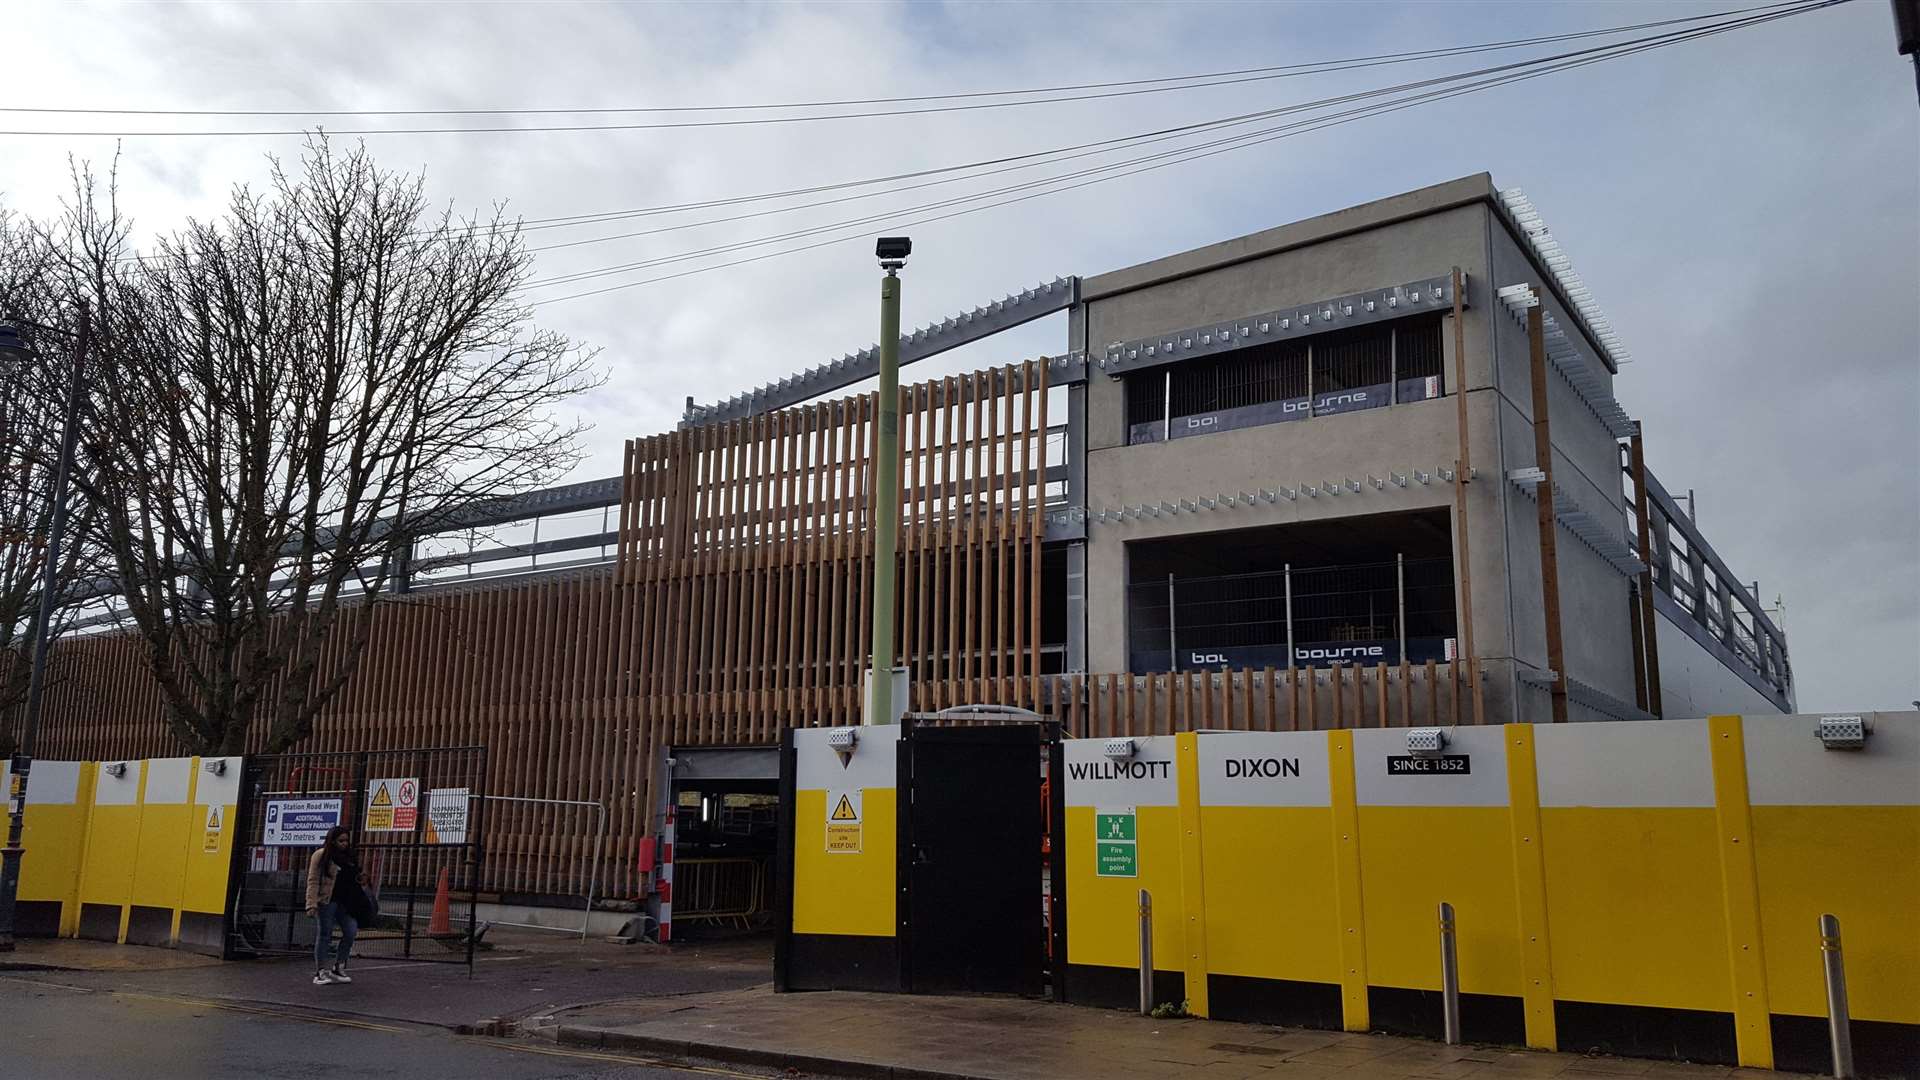 The Canterbury West multi-storey has been under construction throughout 2019